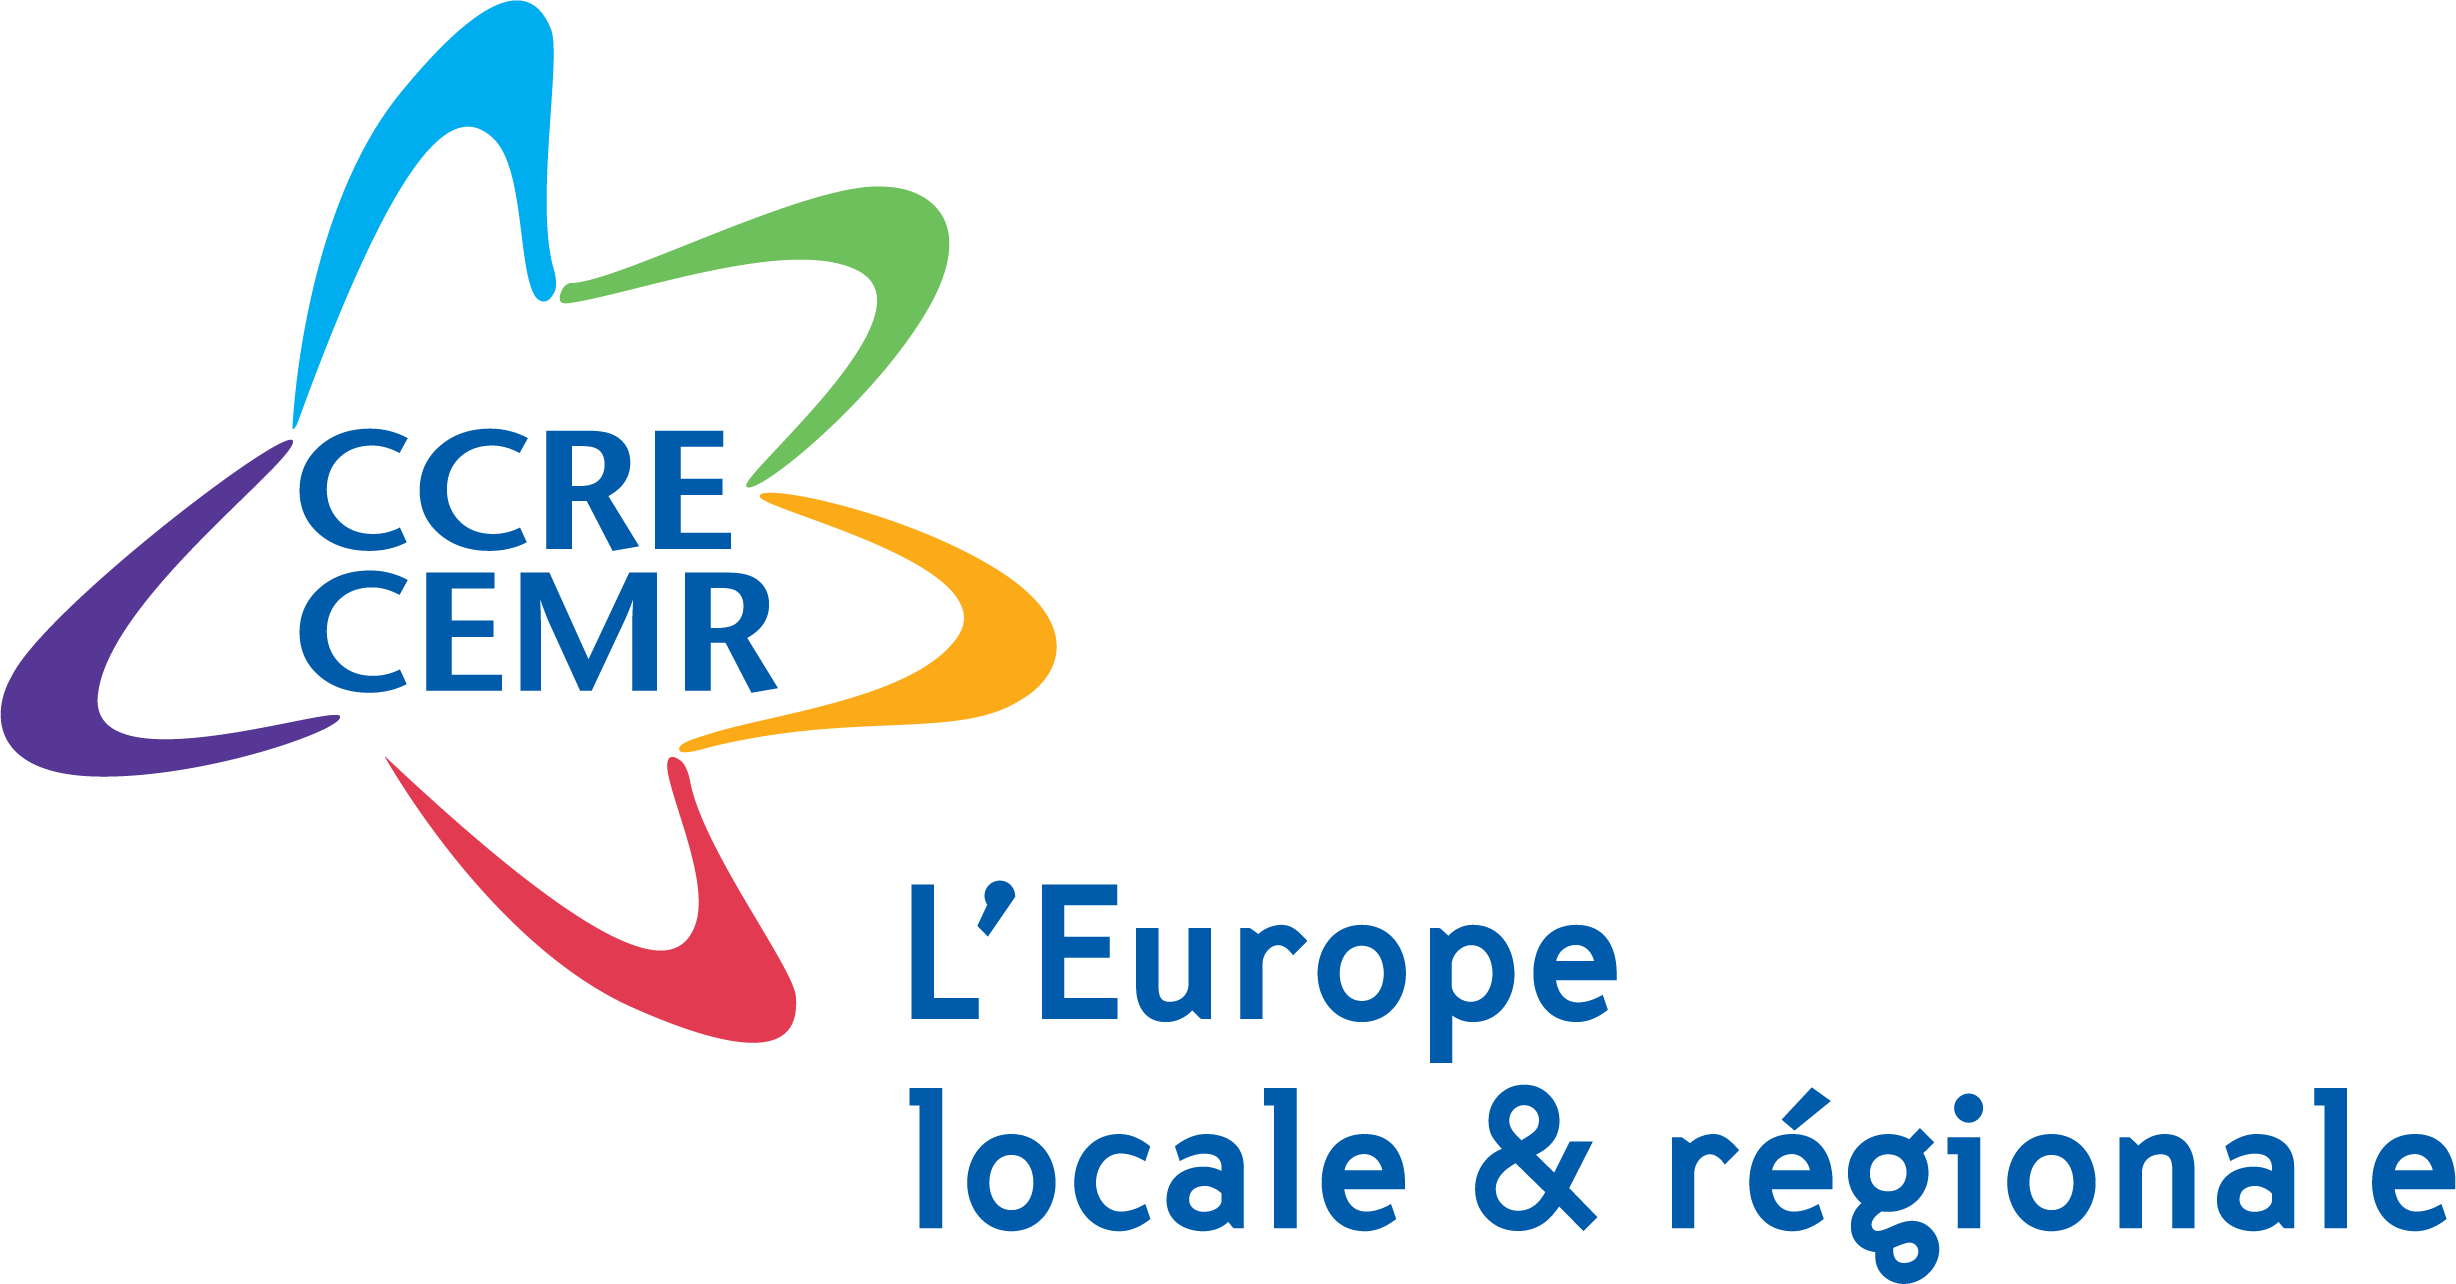 CCRE CEMR - Territorial Governance, Powers and Reforms in Europe - 2021 Edition: Focus on Local Health Care Systems